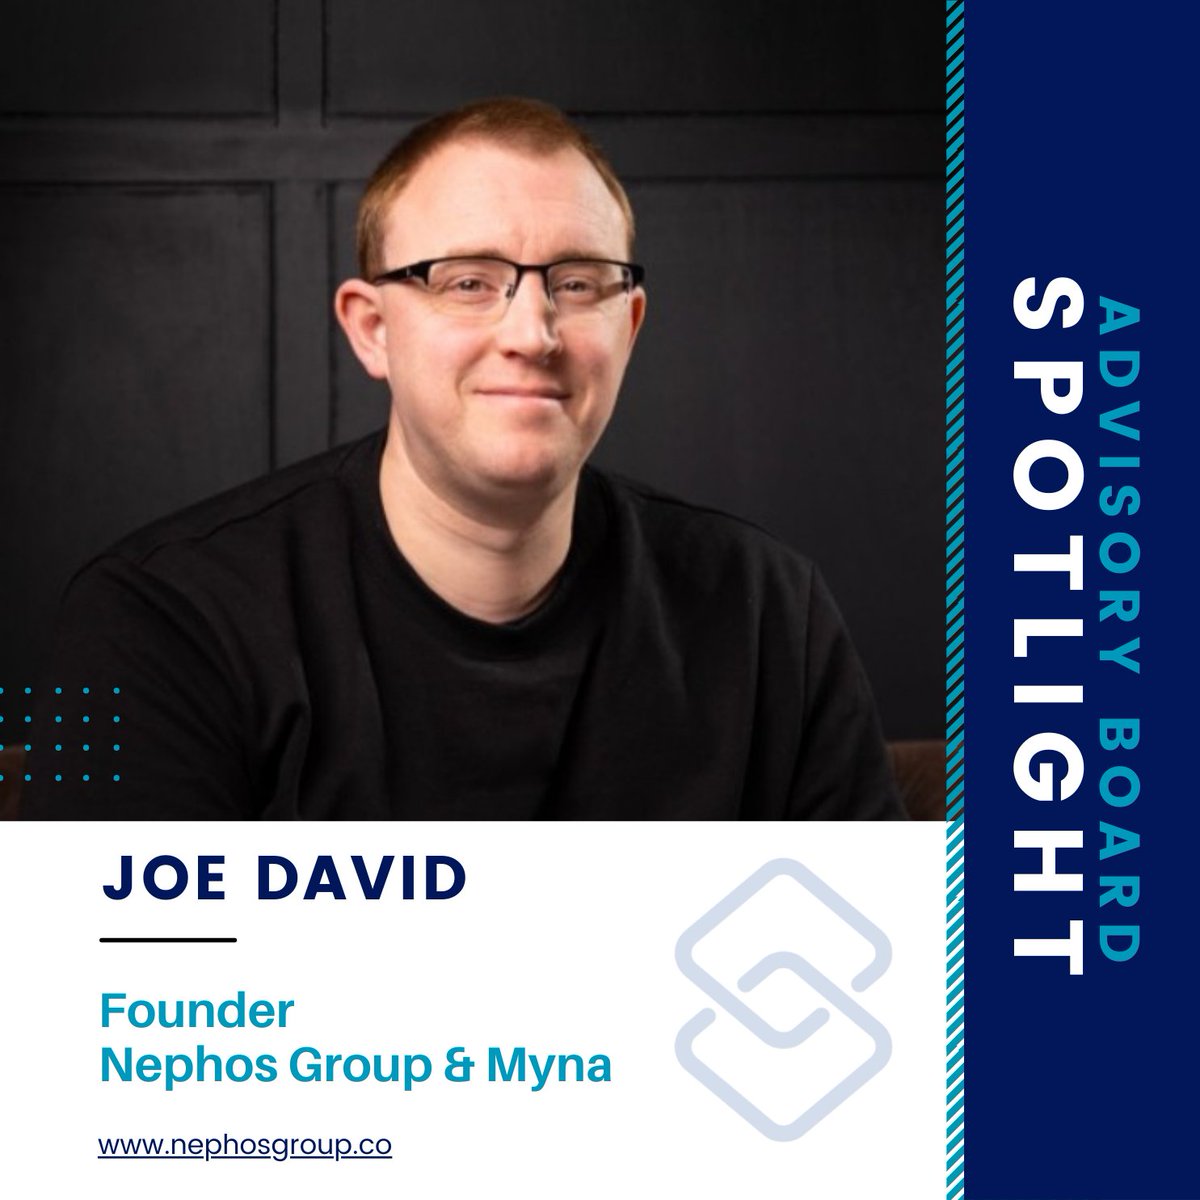 Meet Joe David, founder of Nephos Group & Myna, a leading global crypto accounting firm. As a web3 specialist & scaler of various businesses, Joe is an expert in dealing with businesses in the industry, using regulatory frameworks & analytical interpretations of financial data.